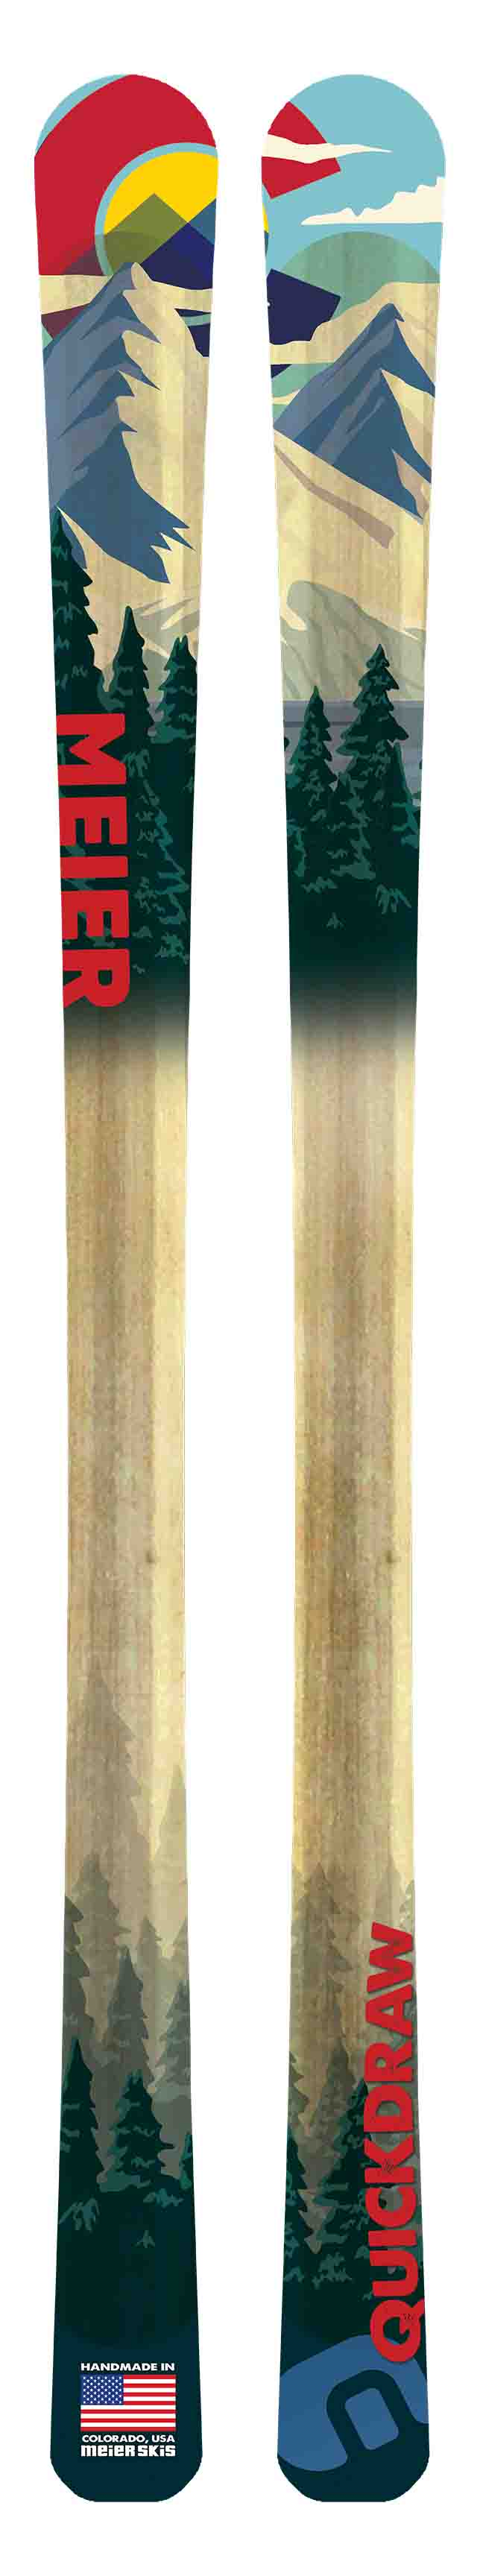 quickdraw skis top